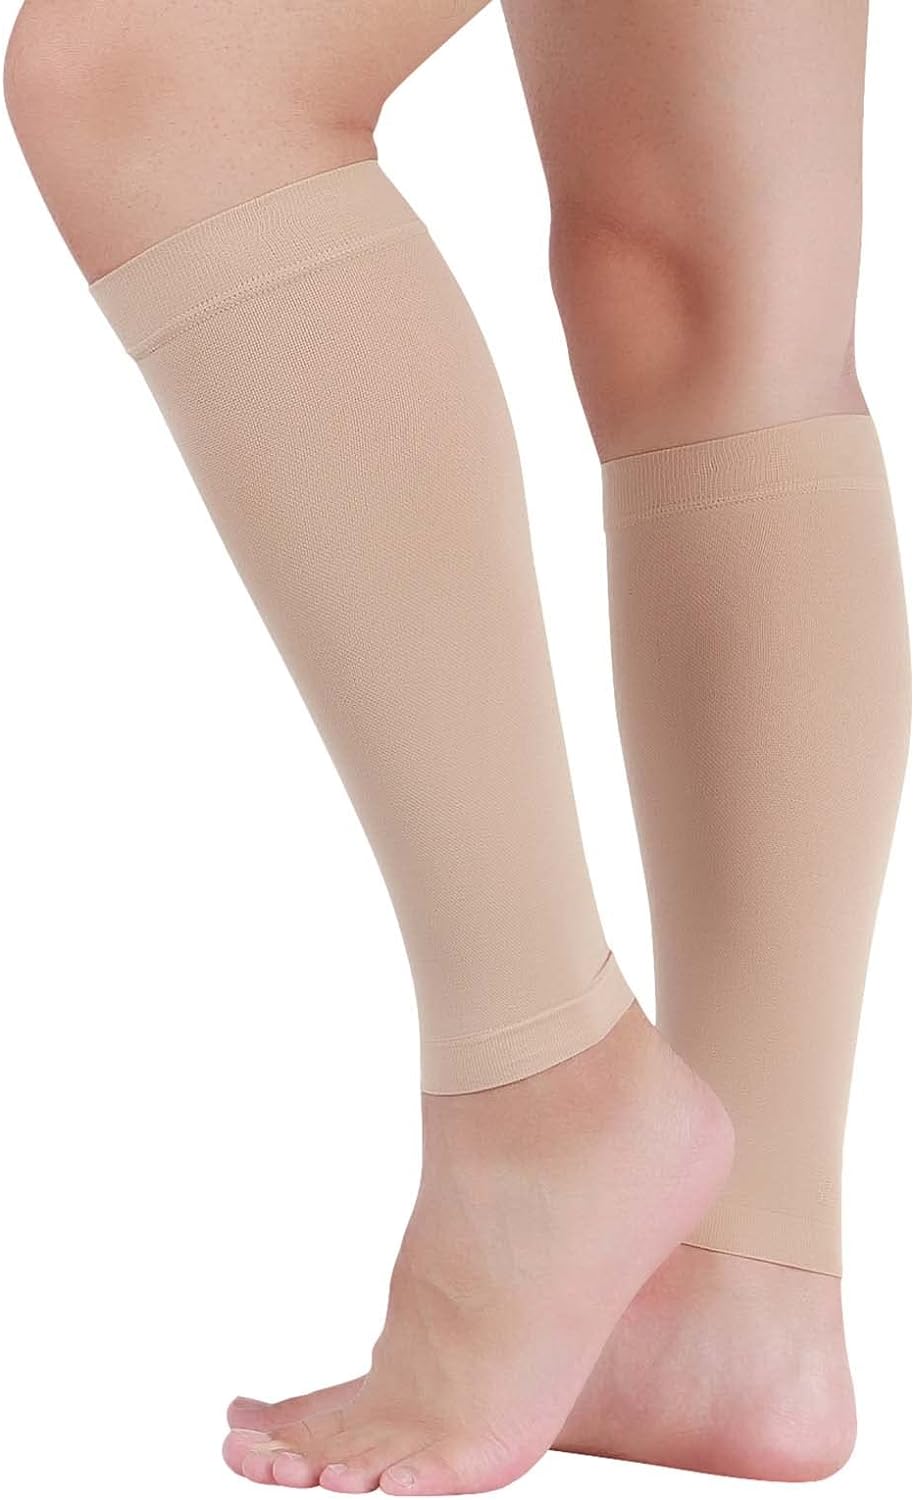 Lin Performance Medical Calf Compression Sleeve for Women and Men, 20-30 mmHg Lightweight Footless Socks for Nurses, Pregnant, Travel and Flight, Varicose Veins, Post Surgery Recovery, Edema